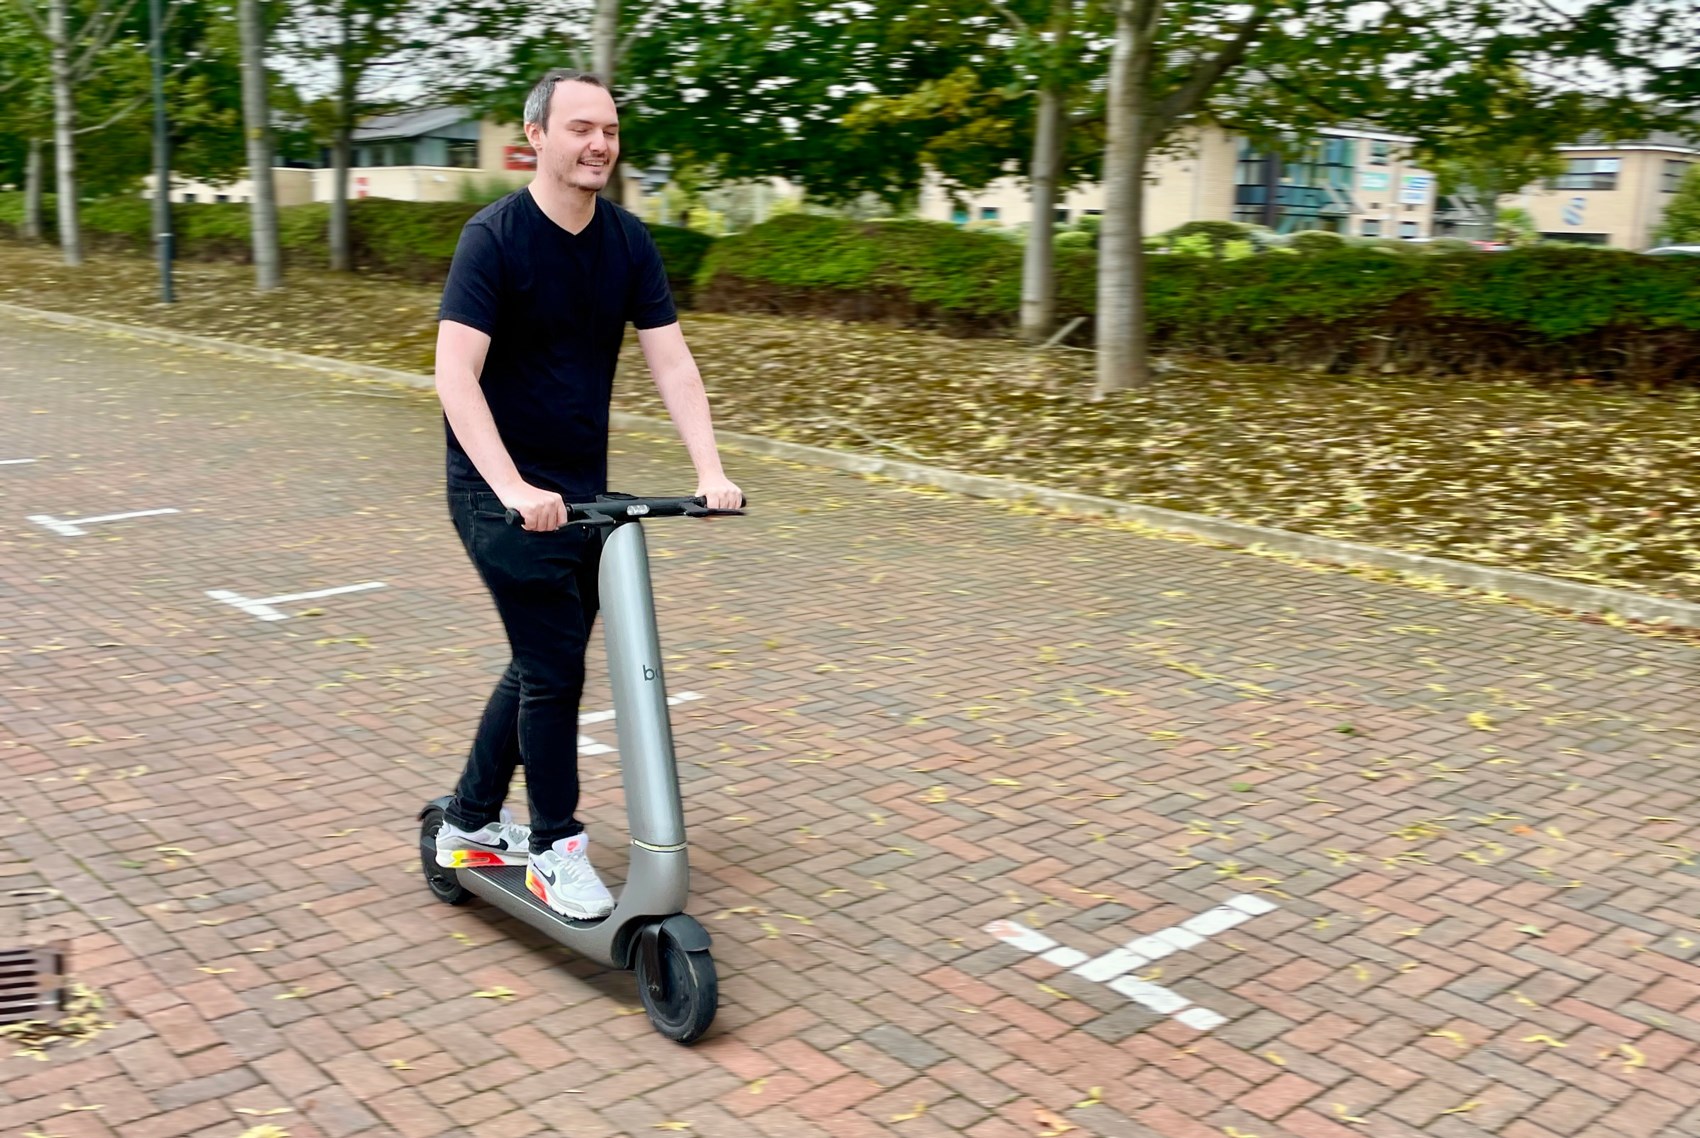 Bo's e-scooter is beyond state of the art